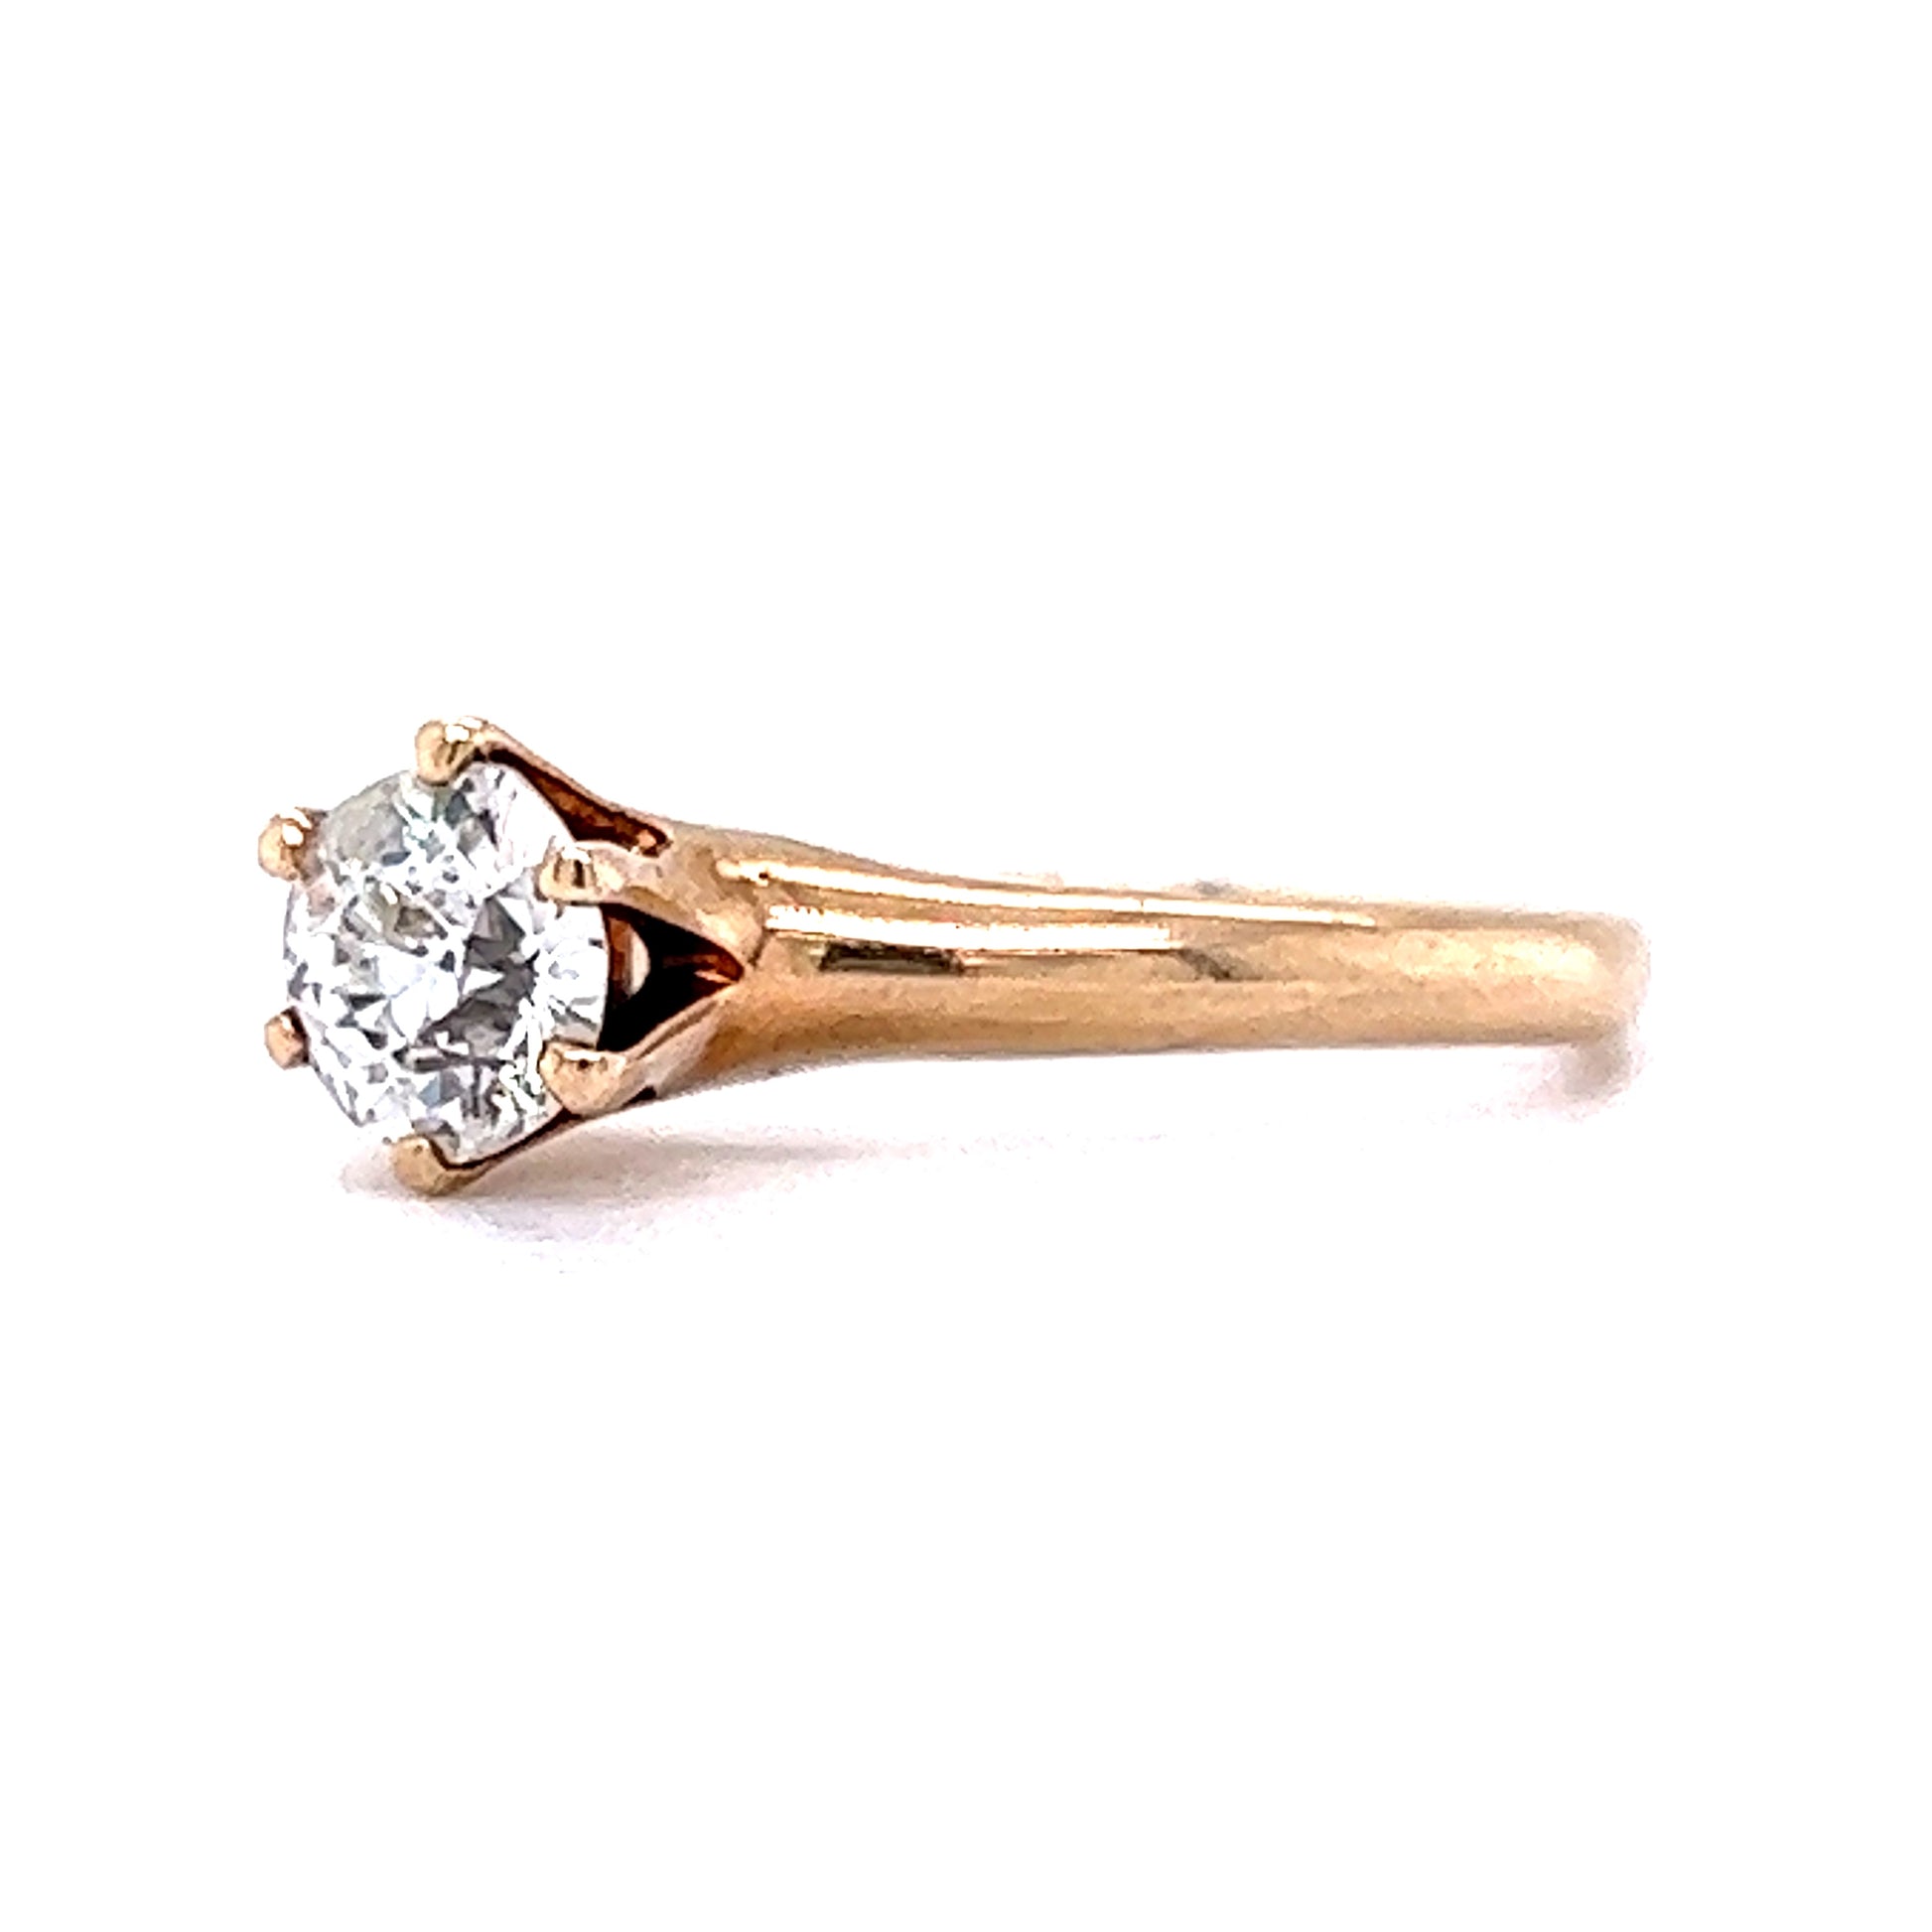 .55 Victorian Solitaire Diamond Engagement Ring in 14k Yellow GoldComposition: 14 Karat Yellow GoldRing Size: 6.5Total Diamond Weight: .55 ctTotal Gram Weight: 2.5 gInscription: 14K